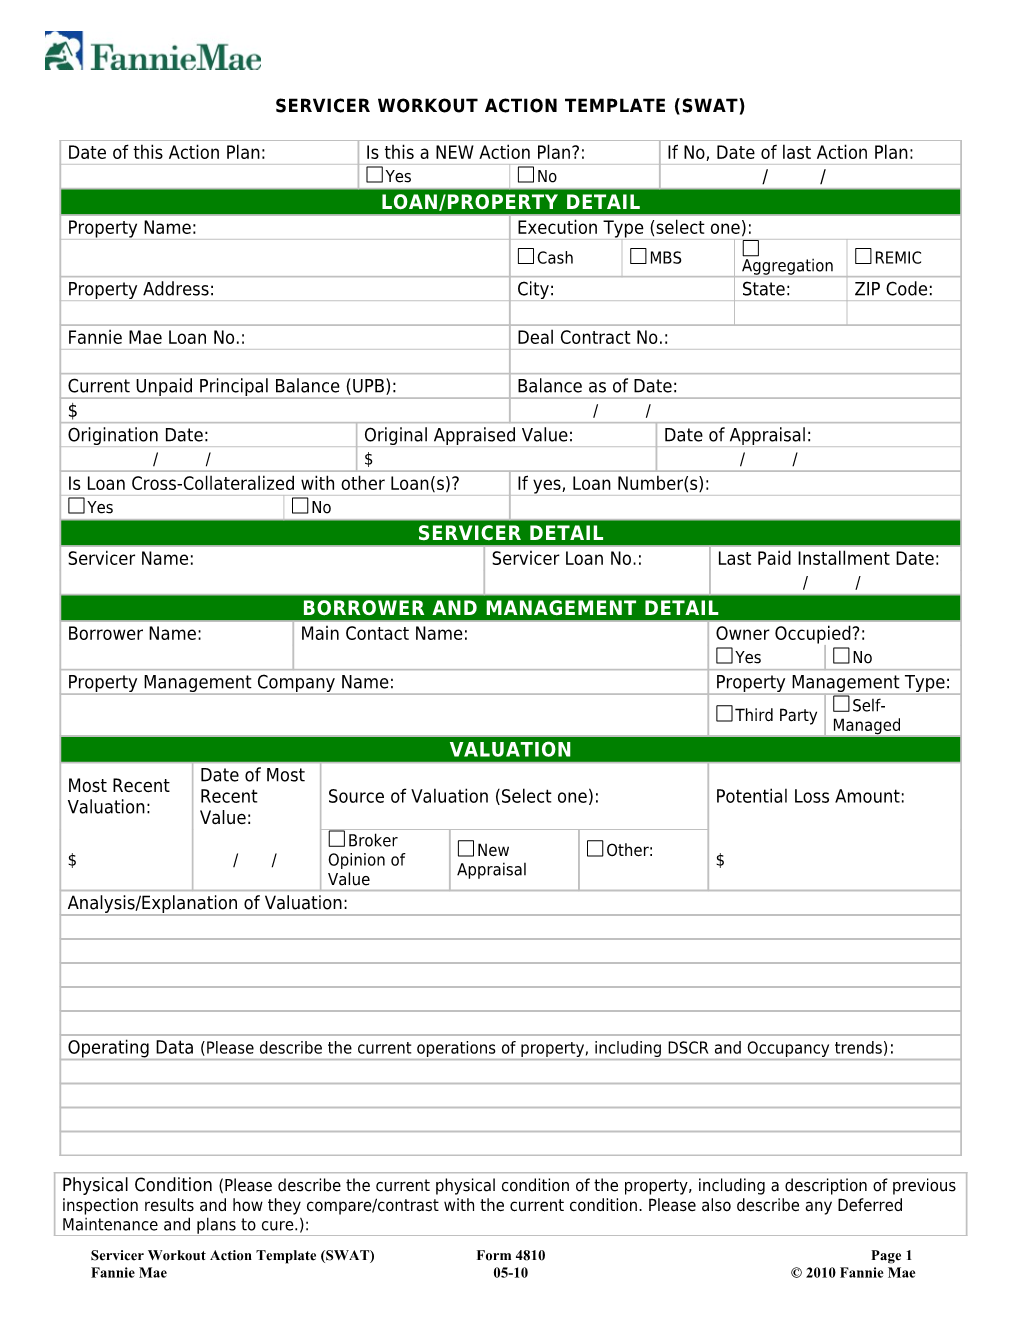 Multifamily Form 4810 Servicer Workout Action Template